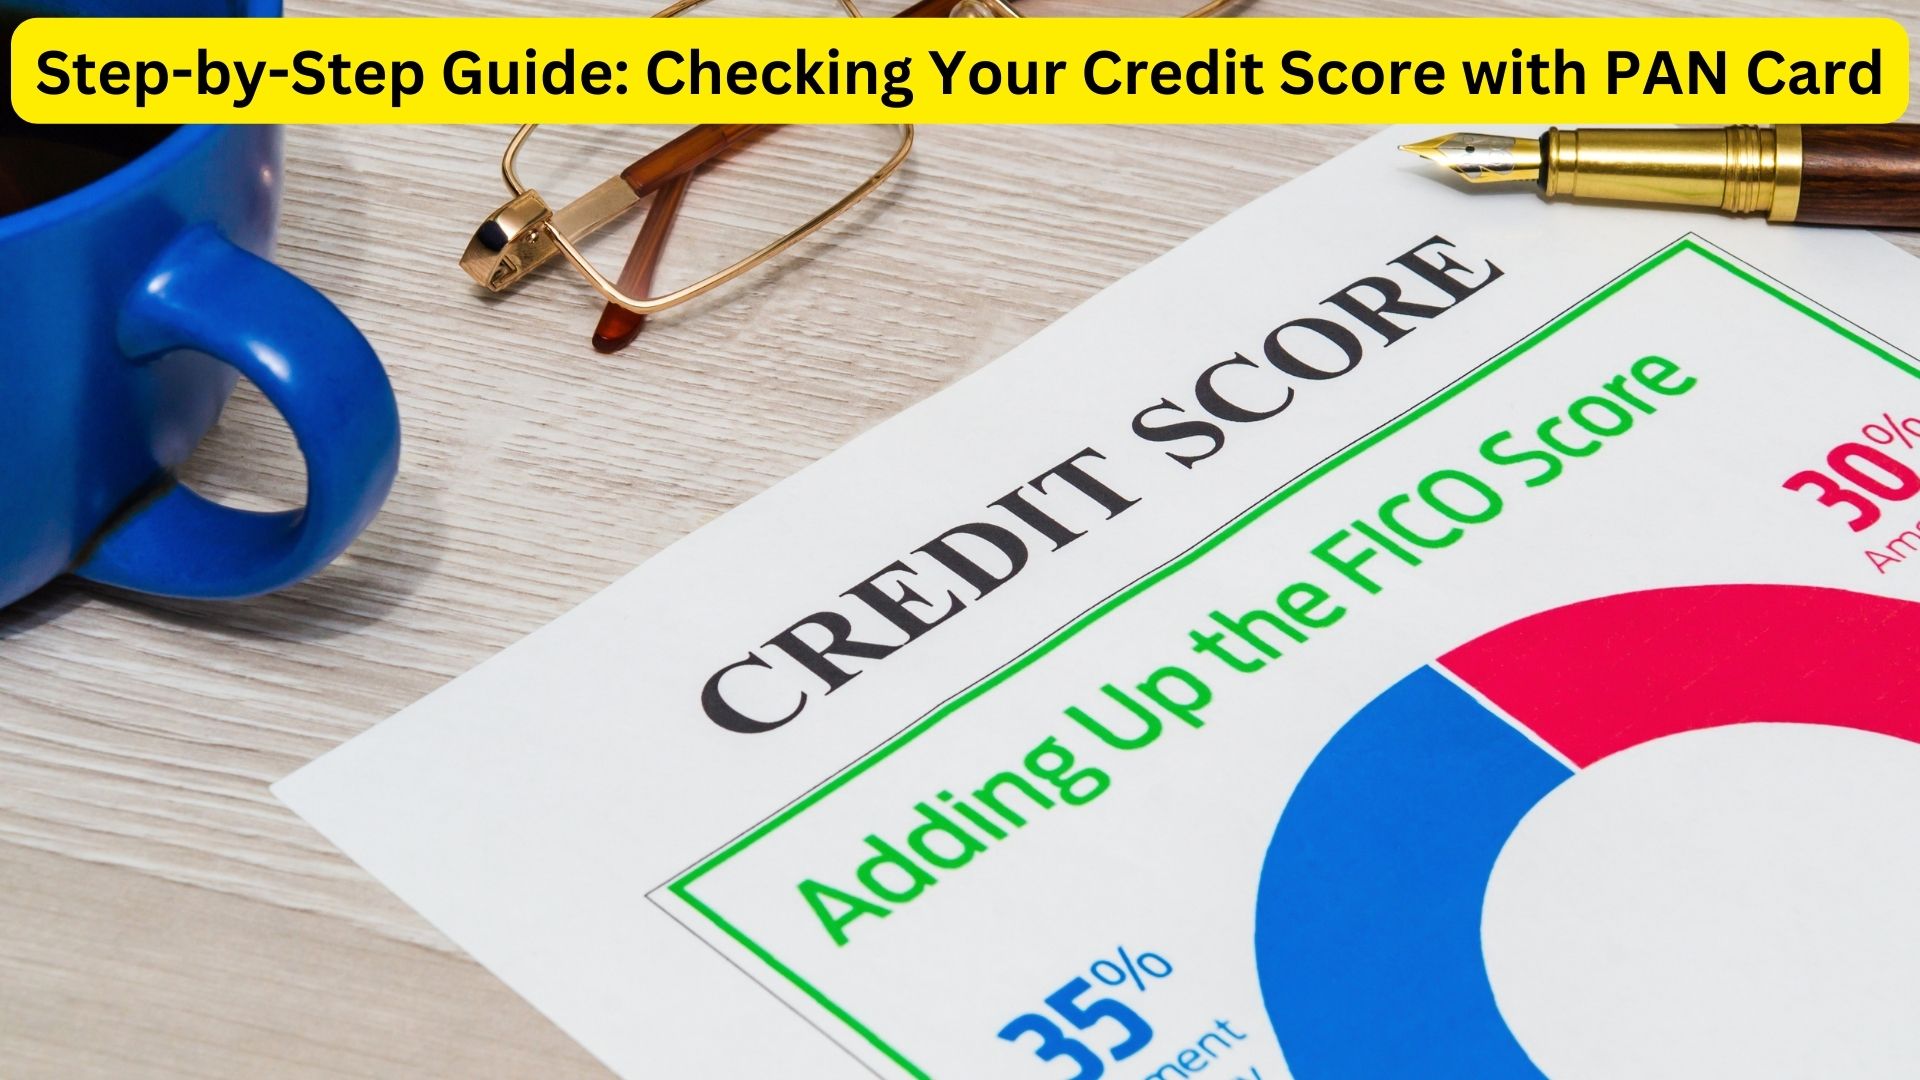 Step-by-Step Guide: Checking Your Credit Score with PAN Card